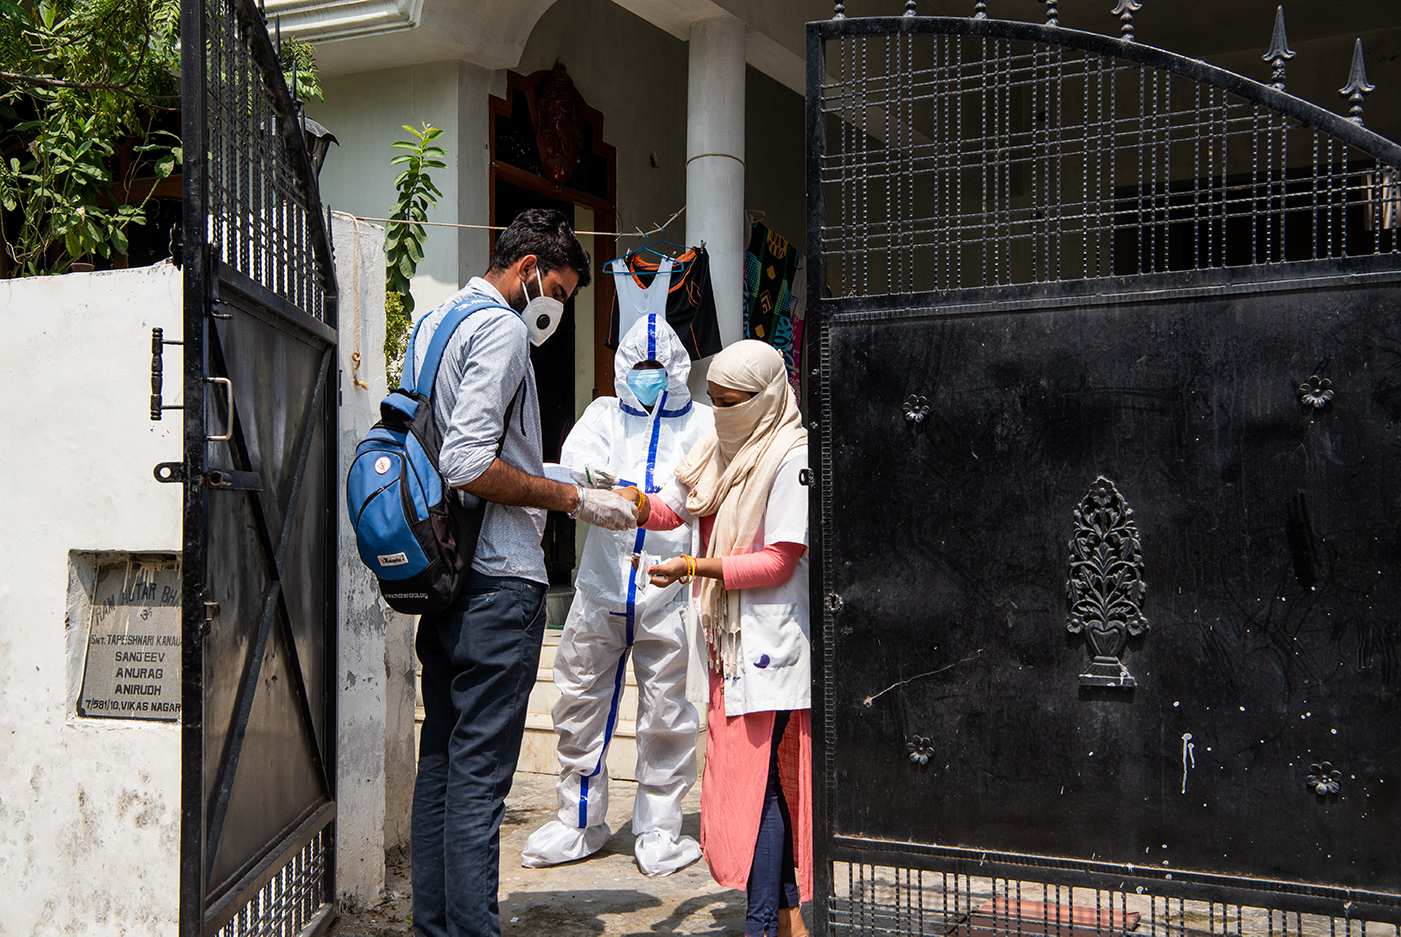 A sampling team collects swab samples at a location with COVID-19 positive cases, and is visited by a surveillance team in Puraniya slum in Lucknow, Uttar Pradesh, India on September 18, 2020.